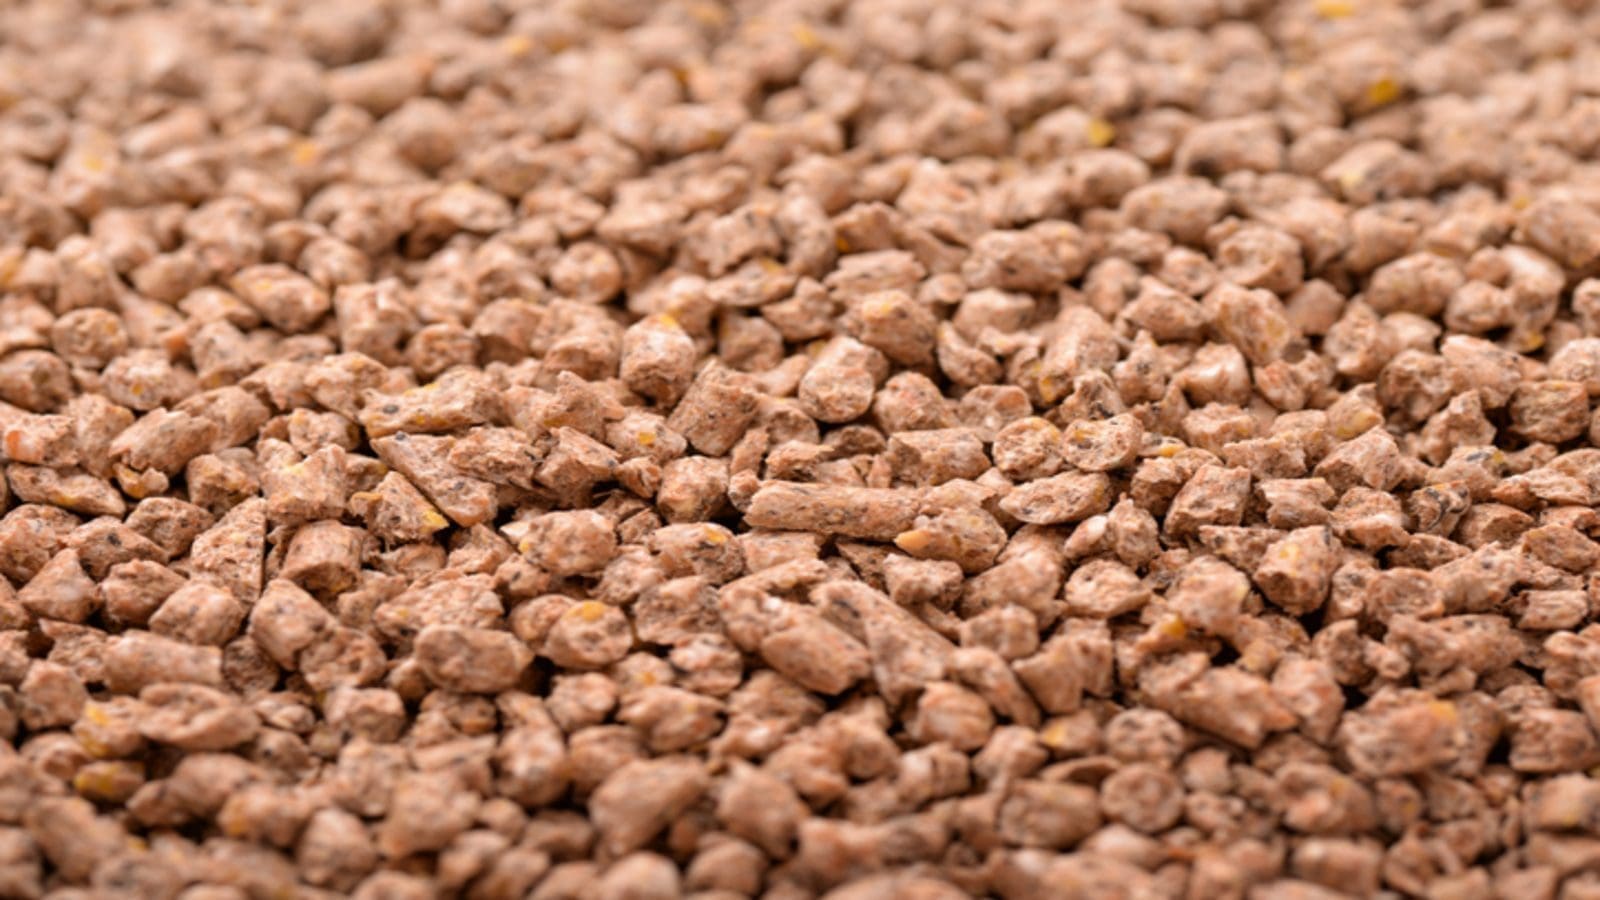 Continued global grain market rally likely to reduce EU 2022 compound animal feed production